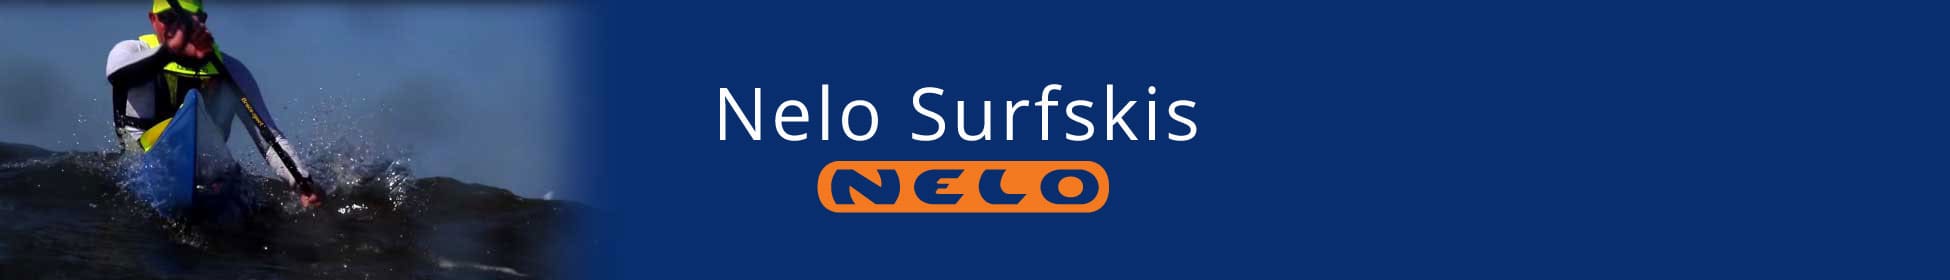 About Nelo Surf skis, Nelo Surfskis for Sale, 510, 520, 540, 550, Vanquish, 560